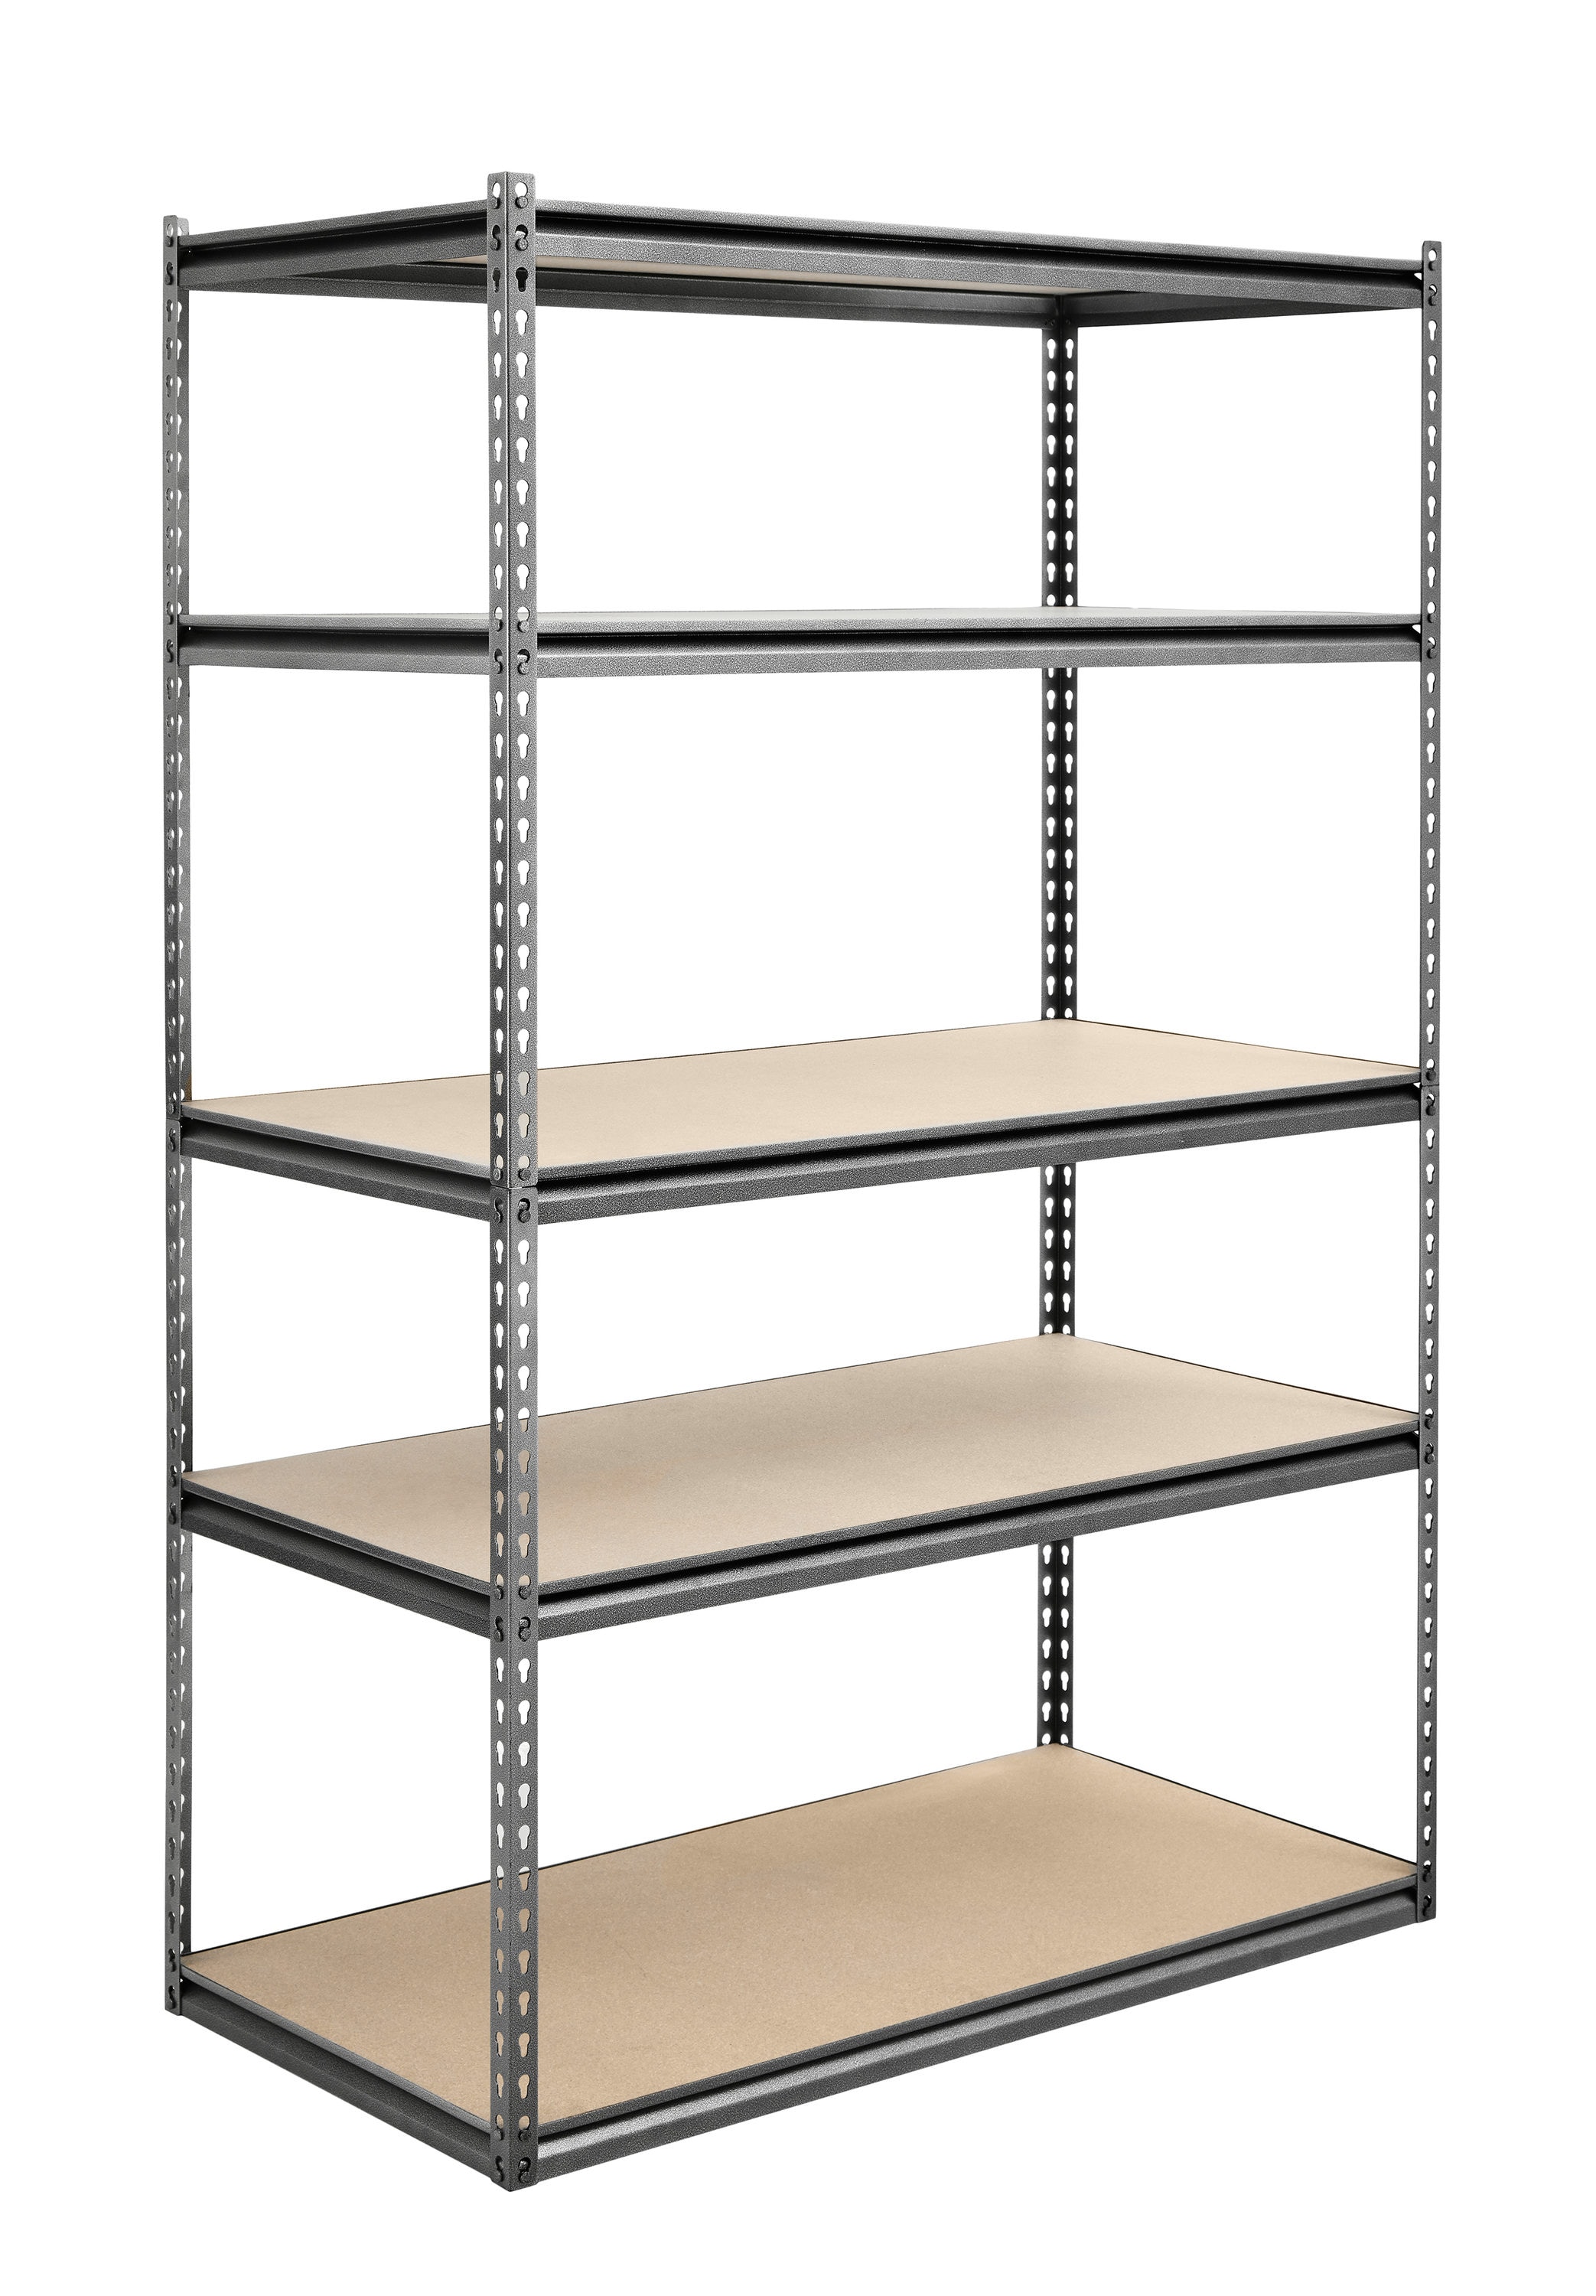 Garage shelving units at Lowes.com: Search Results